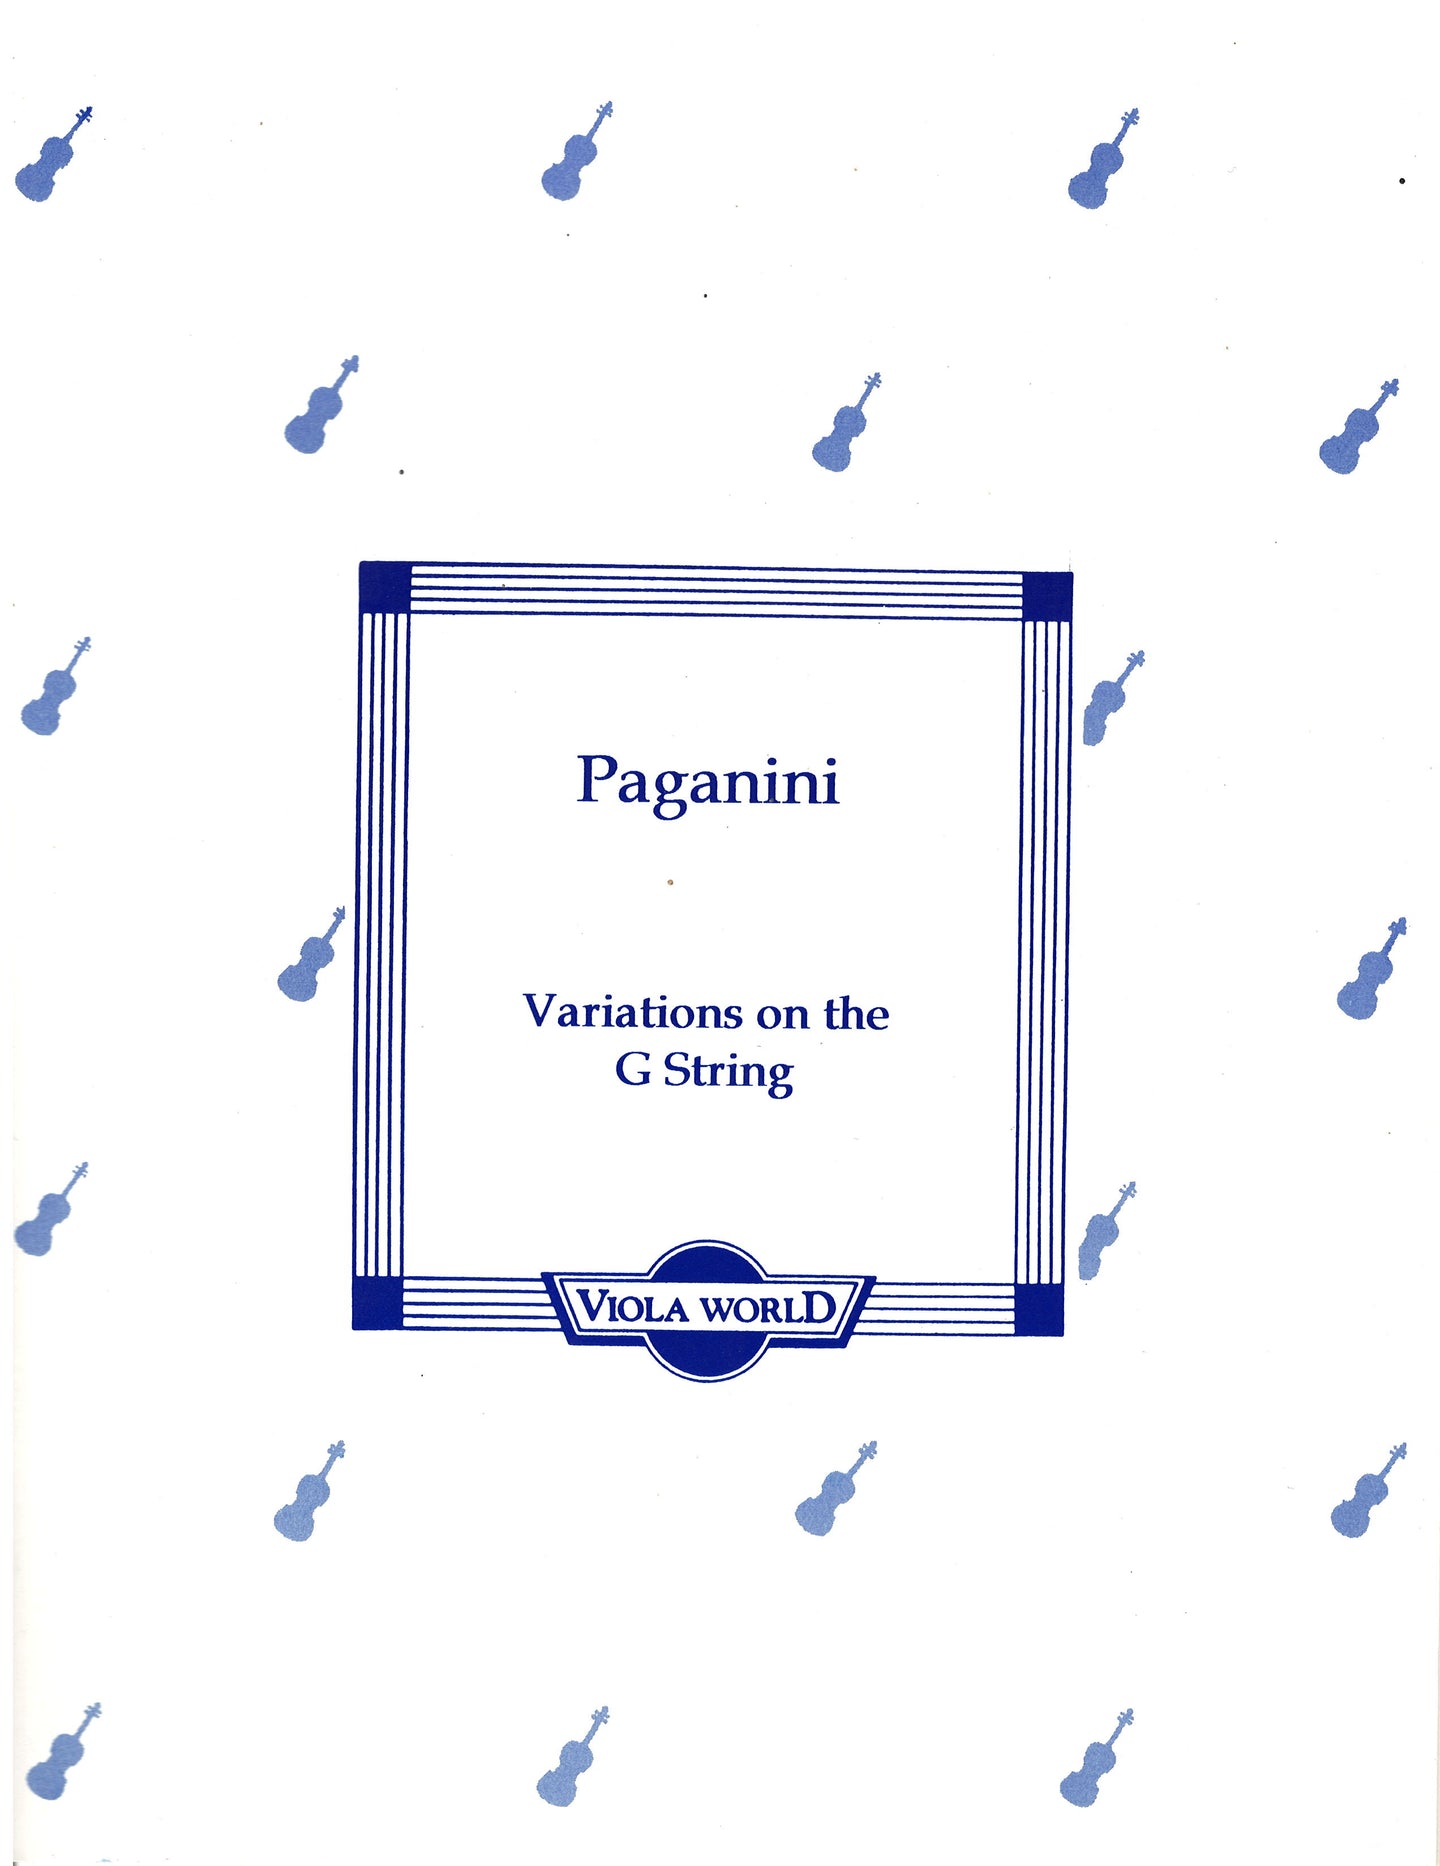 Paganini - Variations on the G String